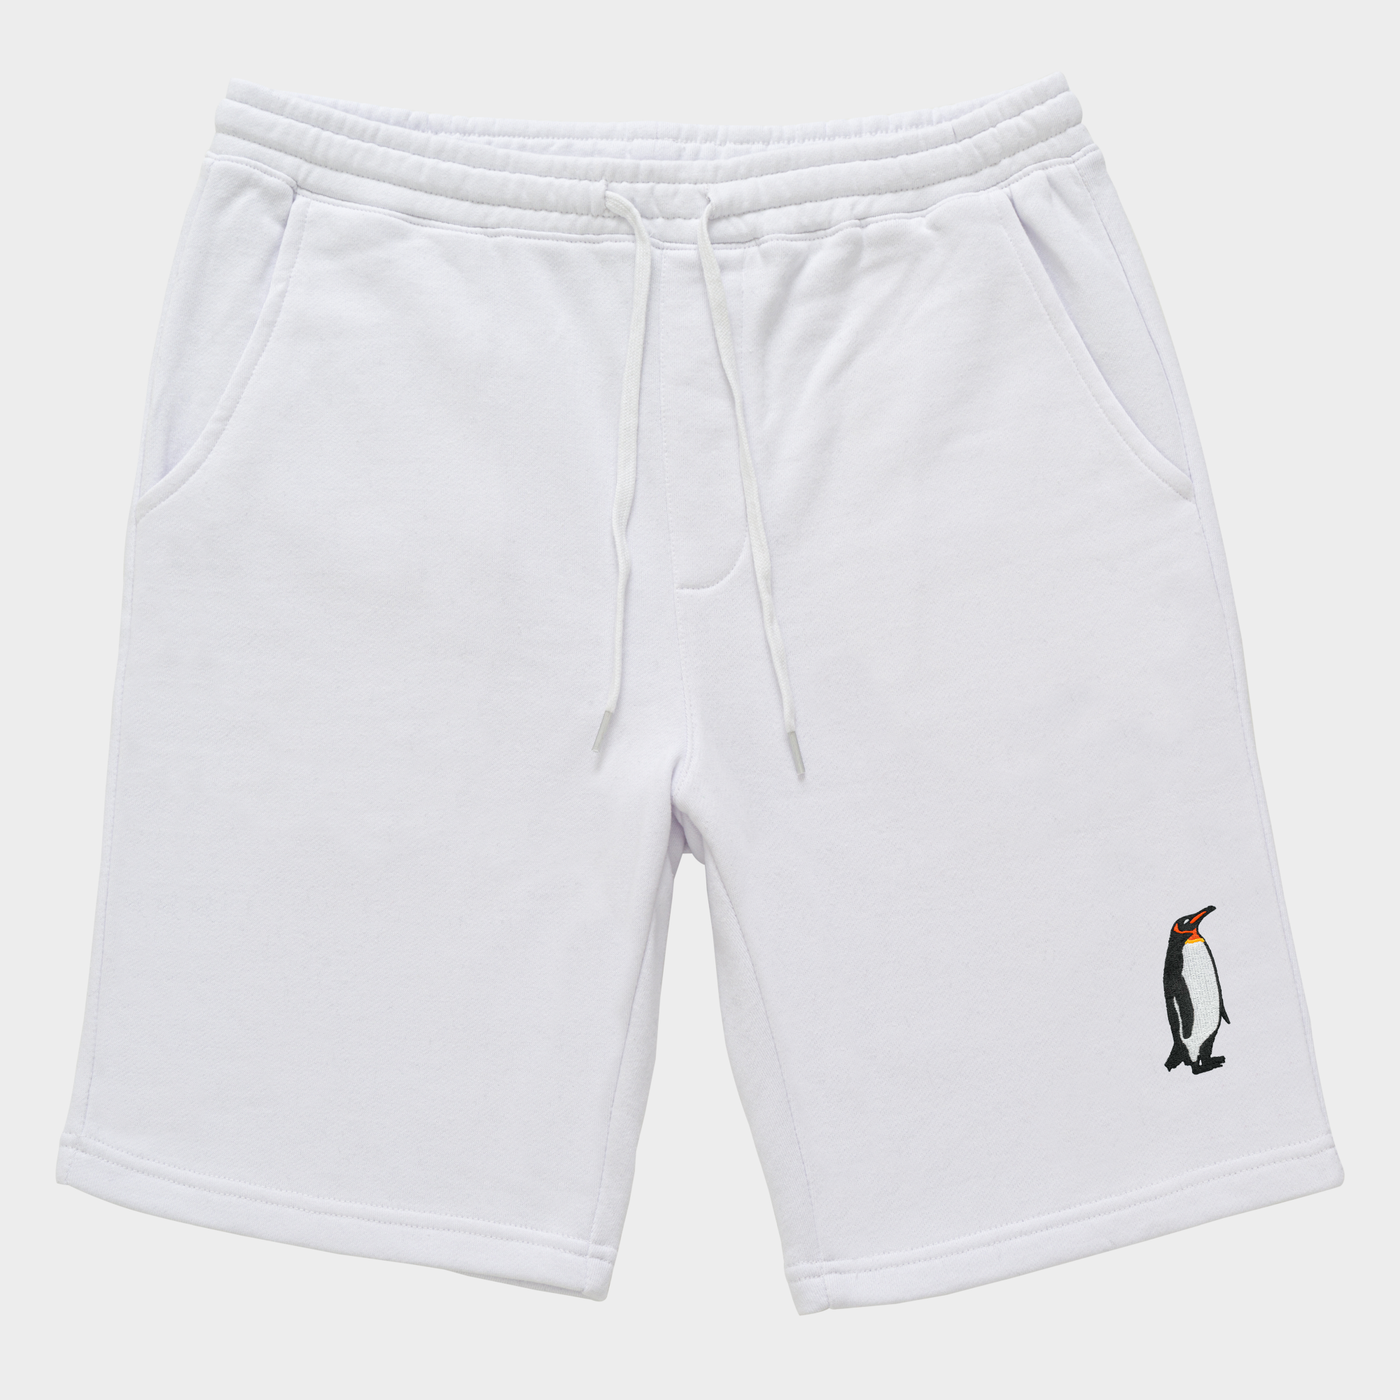 Bobby's Planet Men's Embroidered Penguin Shorts from Arctic Polar Animals Collection in White Color#color_white